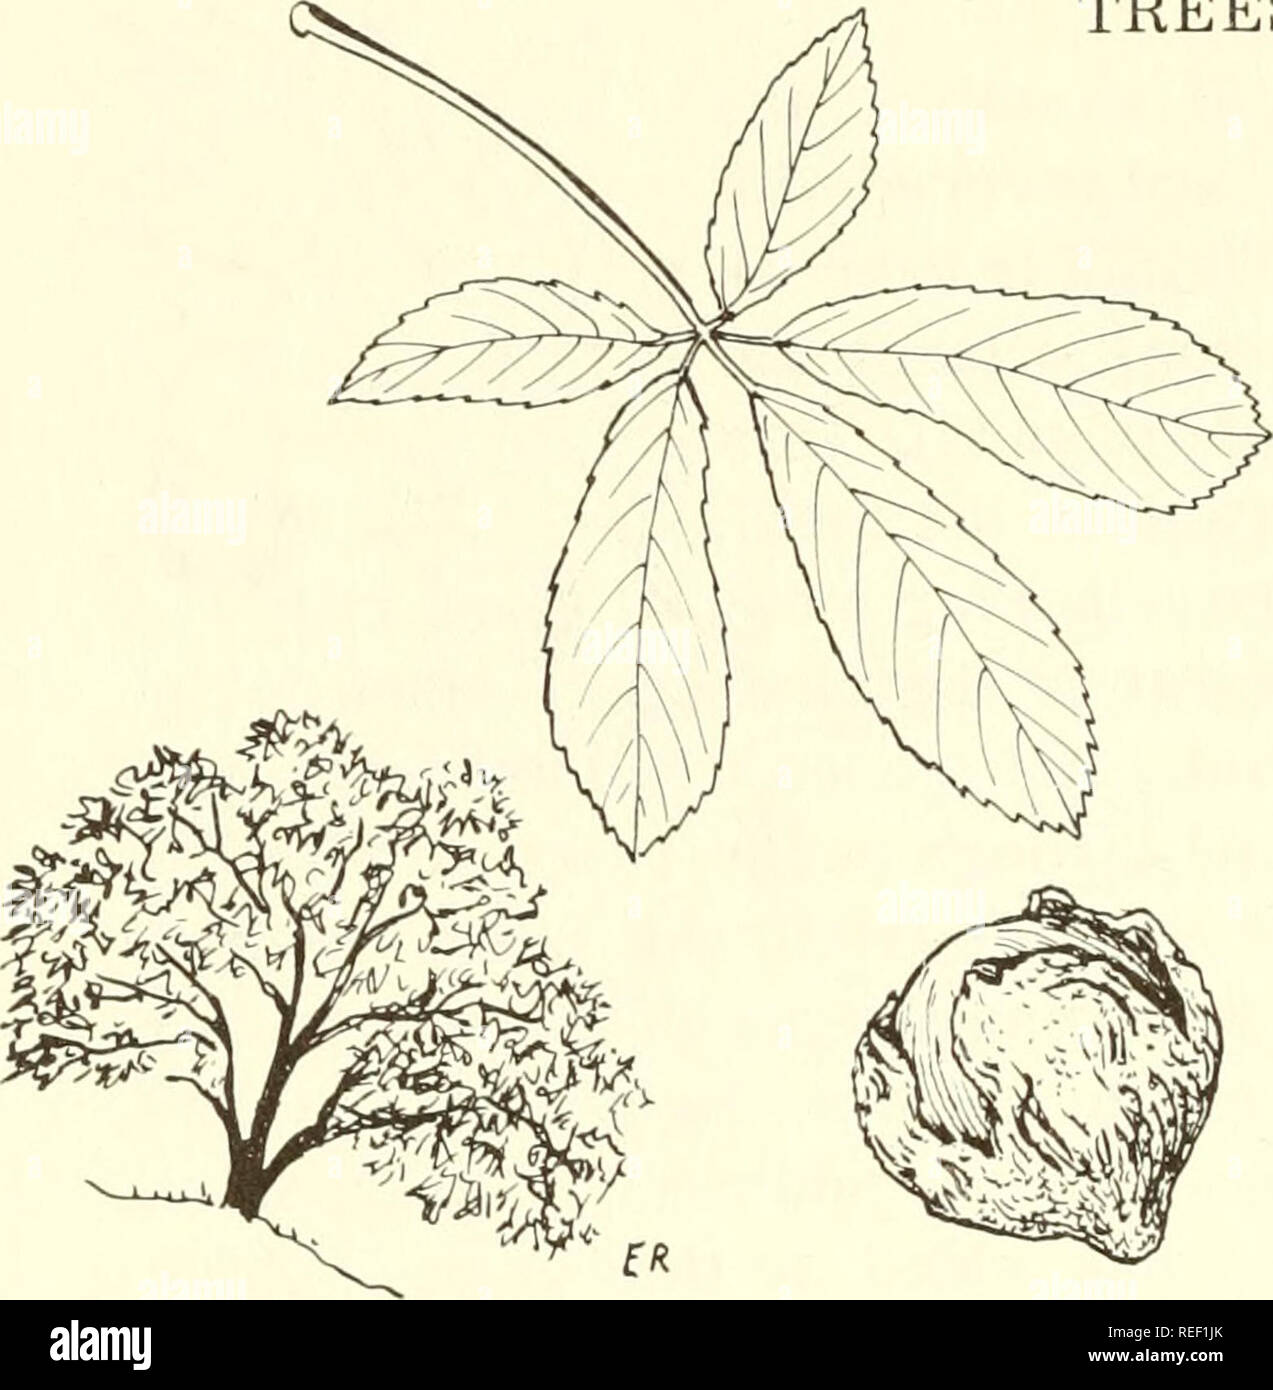 . Common edible and useful plants of the West. Plants, Edible -- West (U. S. ); Botany, Economic; Botany -- West (U. S. ). 14 TREES. properties., Also useful in nervous disorders, intestinal colic, and as an insecticide (said to drive away fleas and lice). The small limbs are used today on chicken roosts as a louse preventitive. The leaves are good flavor addi- tives to stews, roasts, etc. Hung up with garlic to dry, they prevent molding. Str. Wd. Oak Calif. Str. Wd. Oak Calif. T-12. BUCKEYE, CALIFORNIA Aesculus cali- fornica; Buckeye Fam. 12'-25'high tree, with 5 finger-like, light green leaf Stock Photo